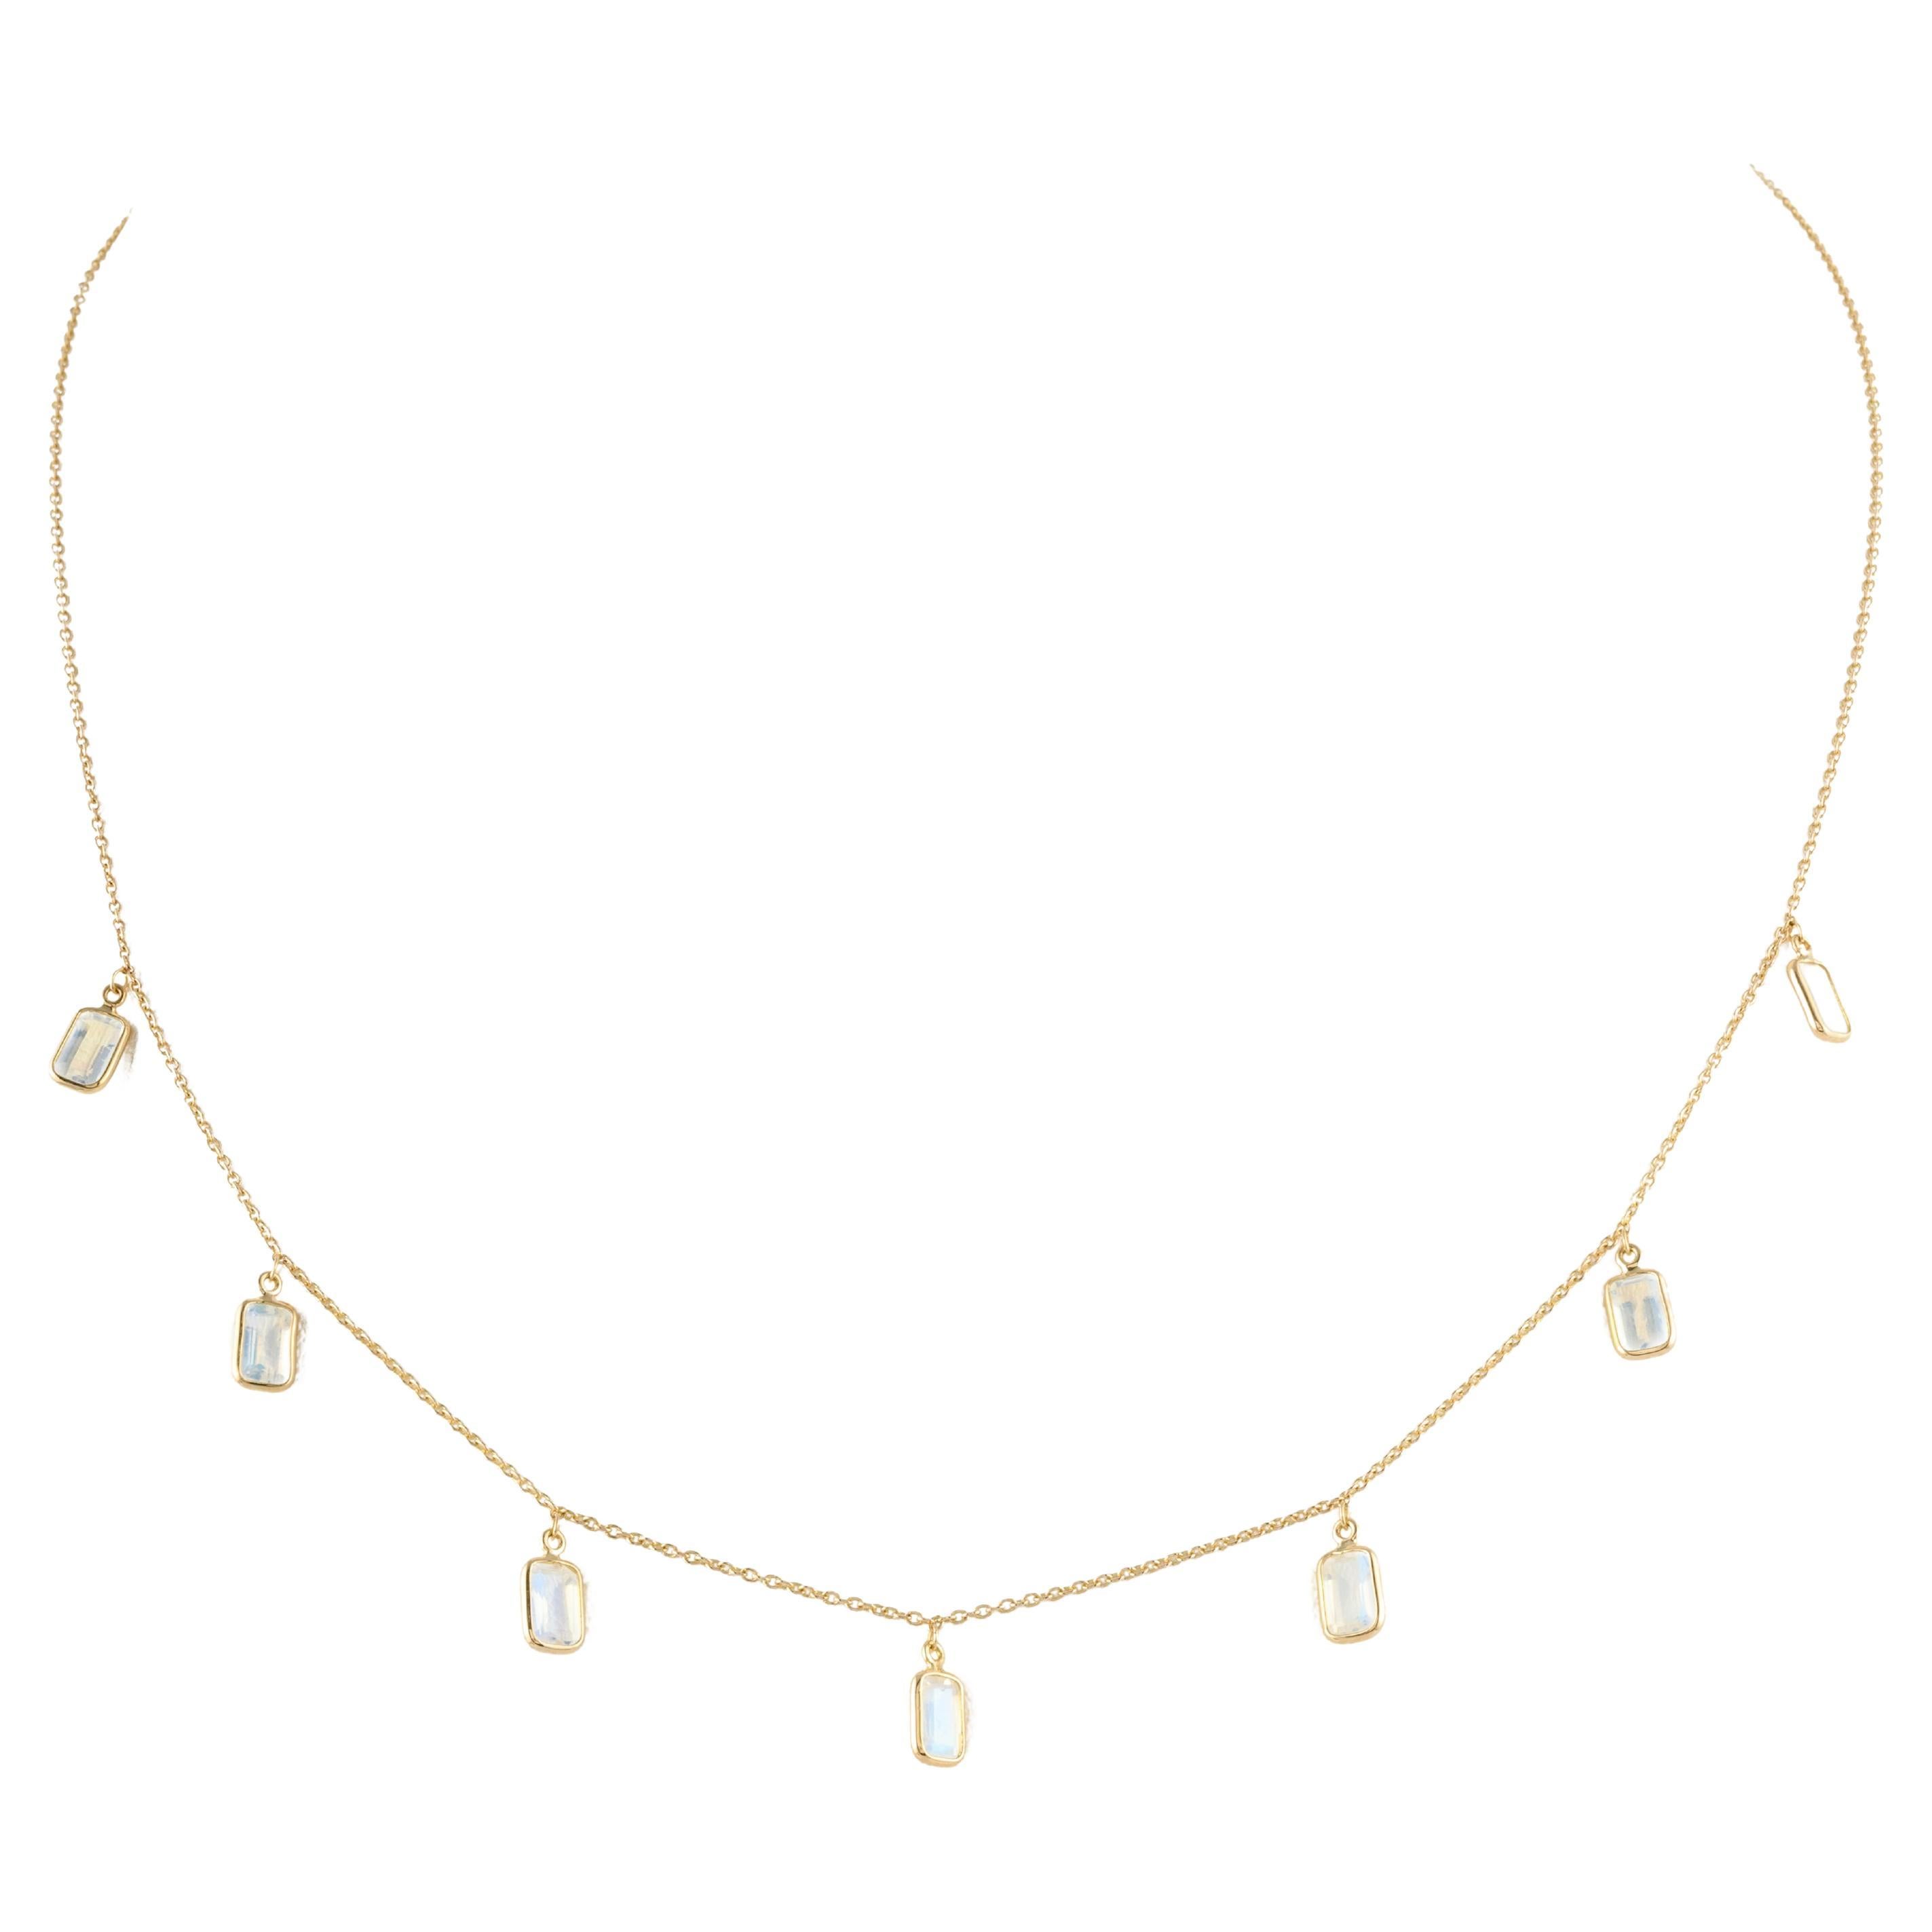 Rainbow Moonstone Chain Necklace Gift for Girlfriend in 18k Solid Yellow Gold